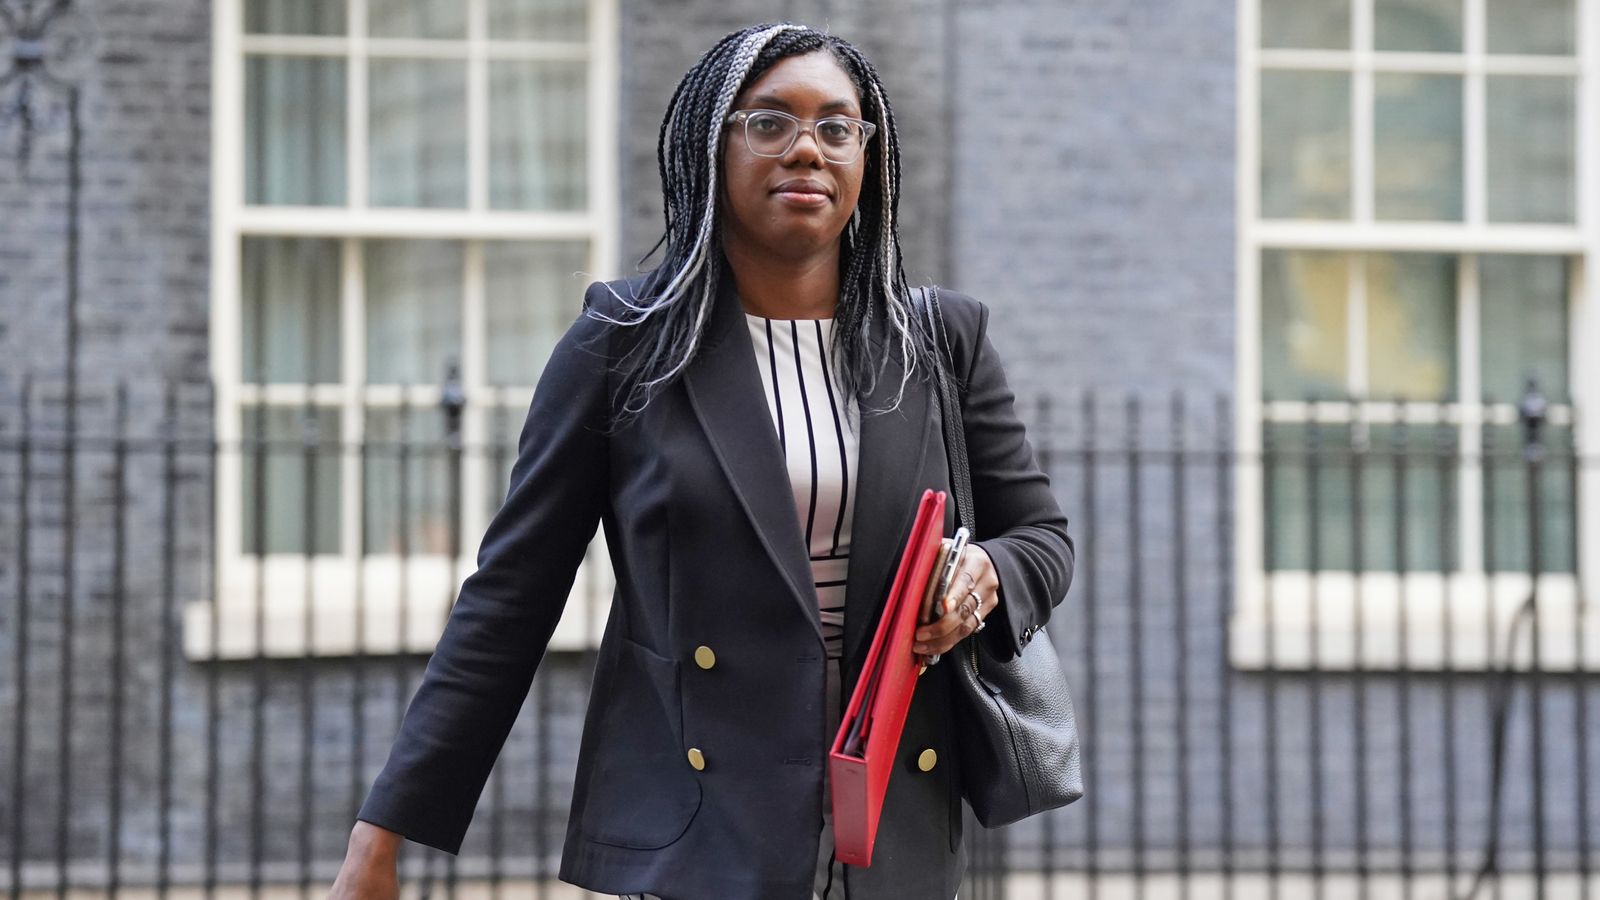 'Who do you think you are speaking to?': Speaker rebukes Kemi Badenoch as Tory MPs line up to criticise EU law U-turn